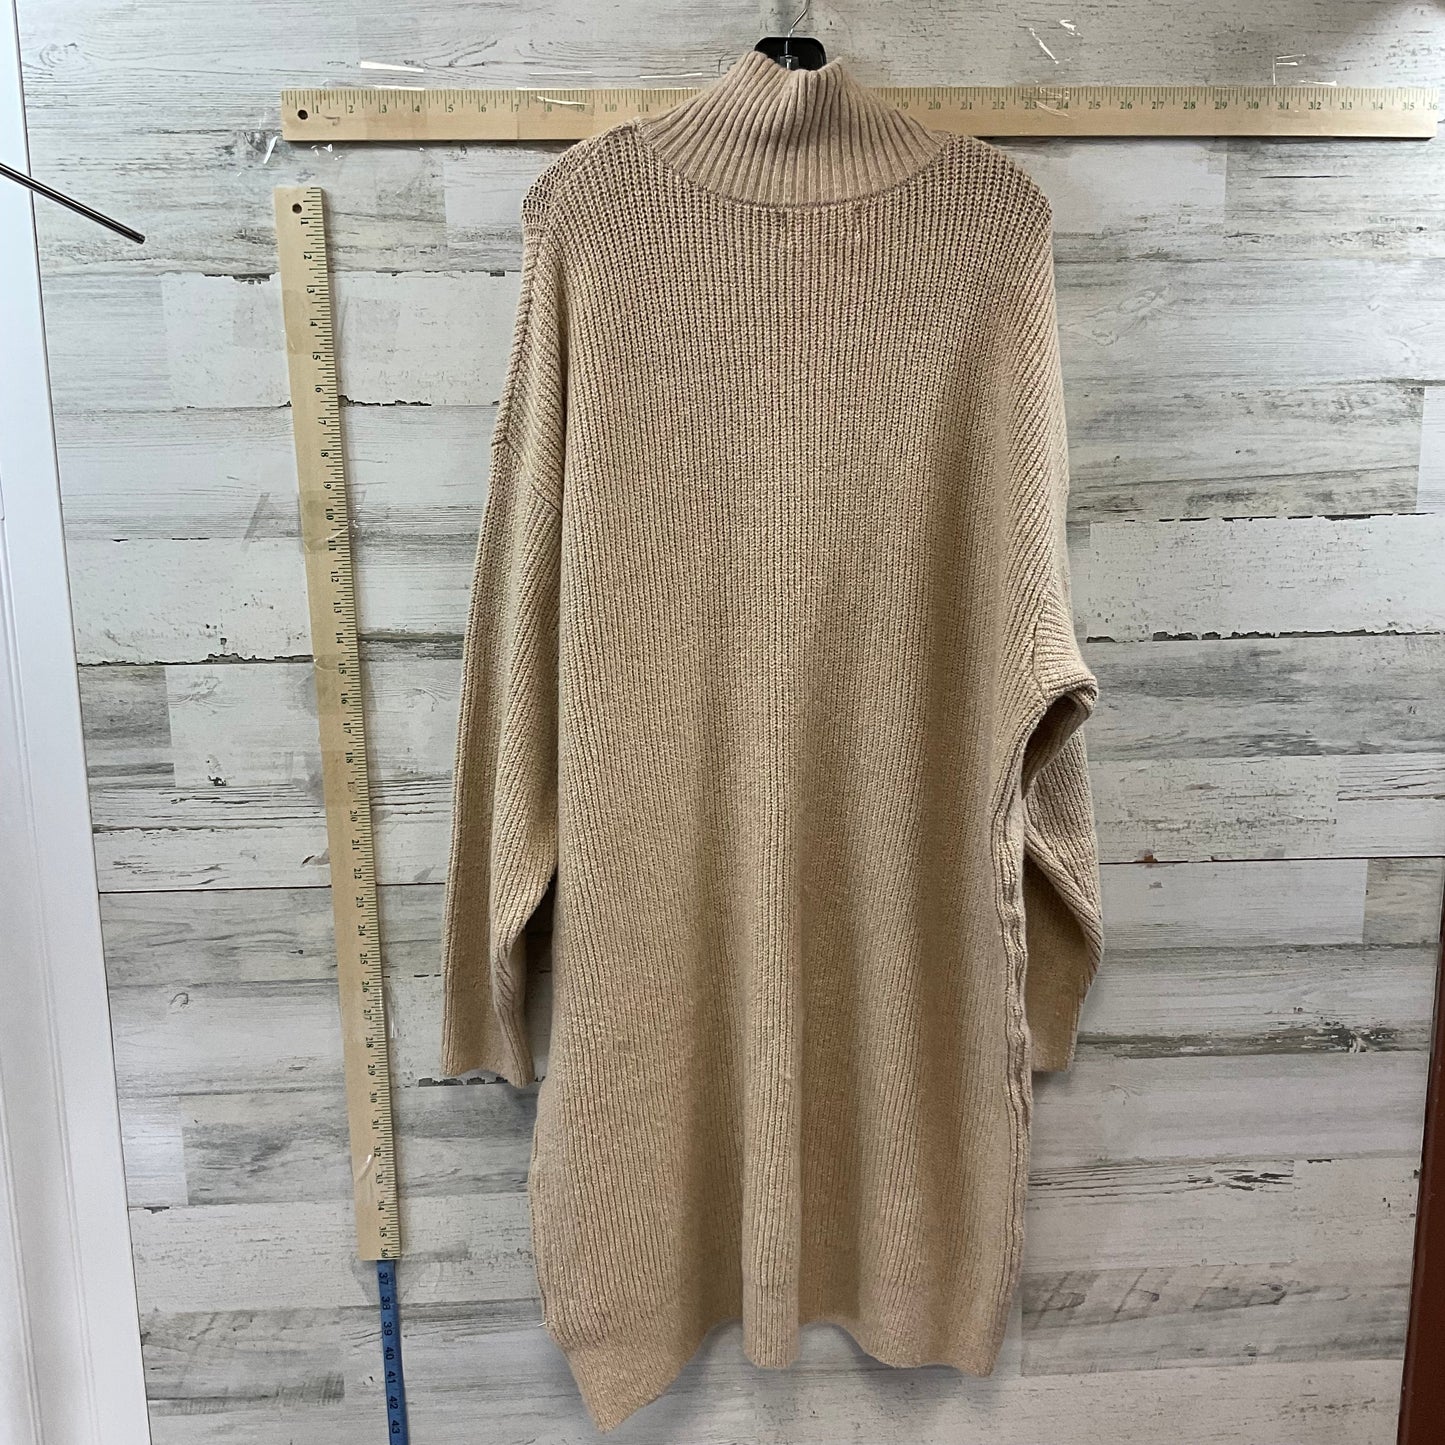 Dress Sweater By Old Navy  Size: 3x